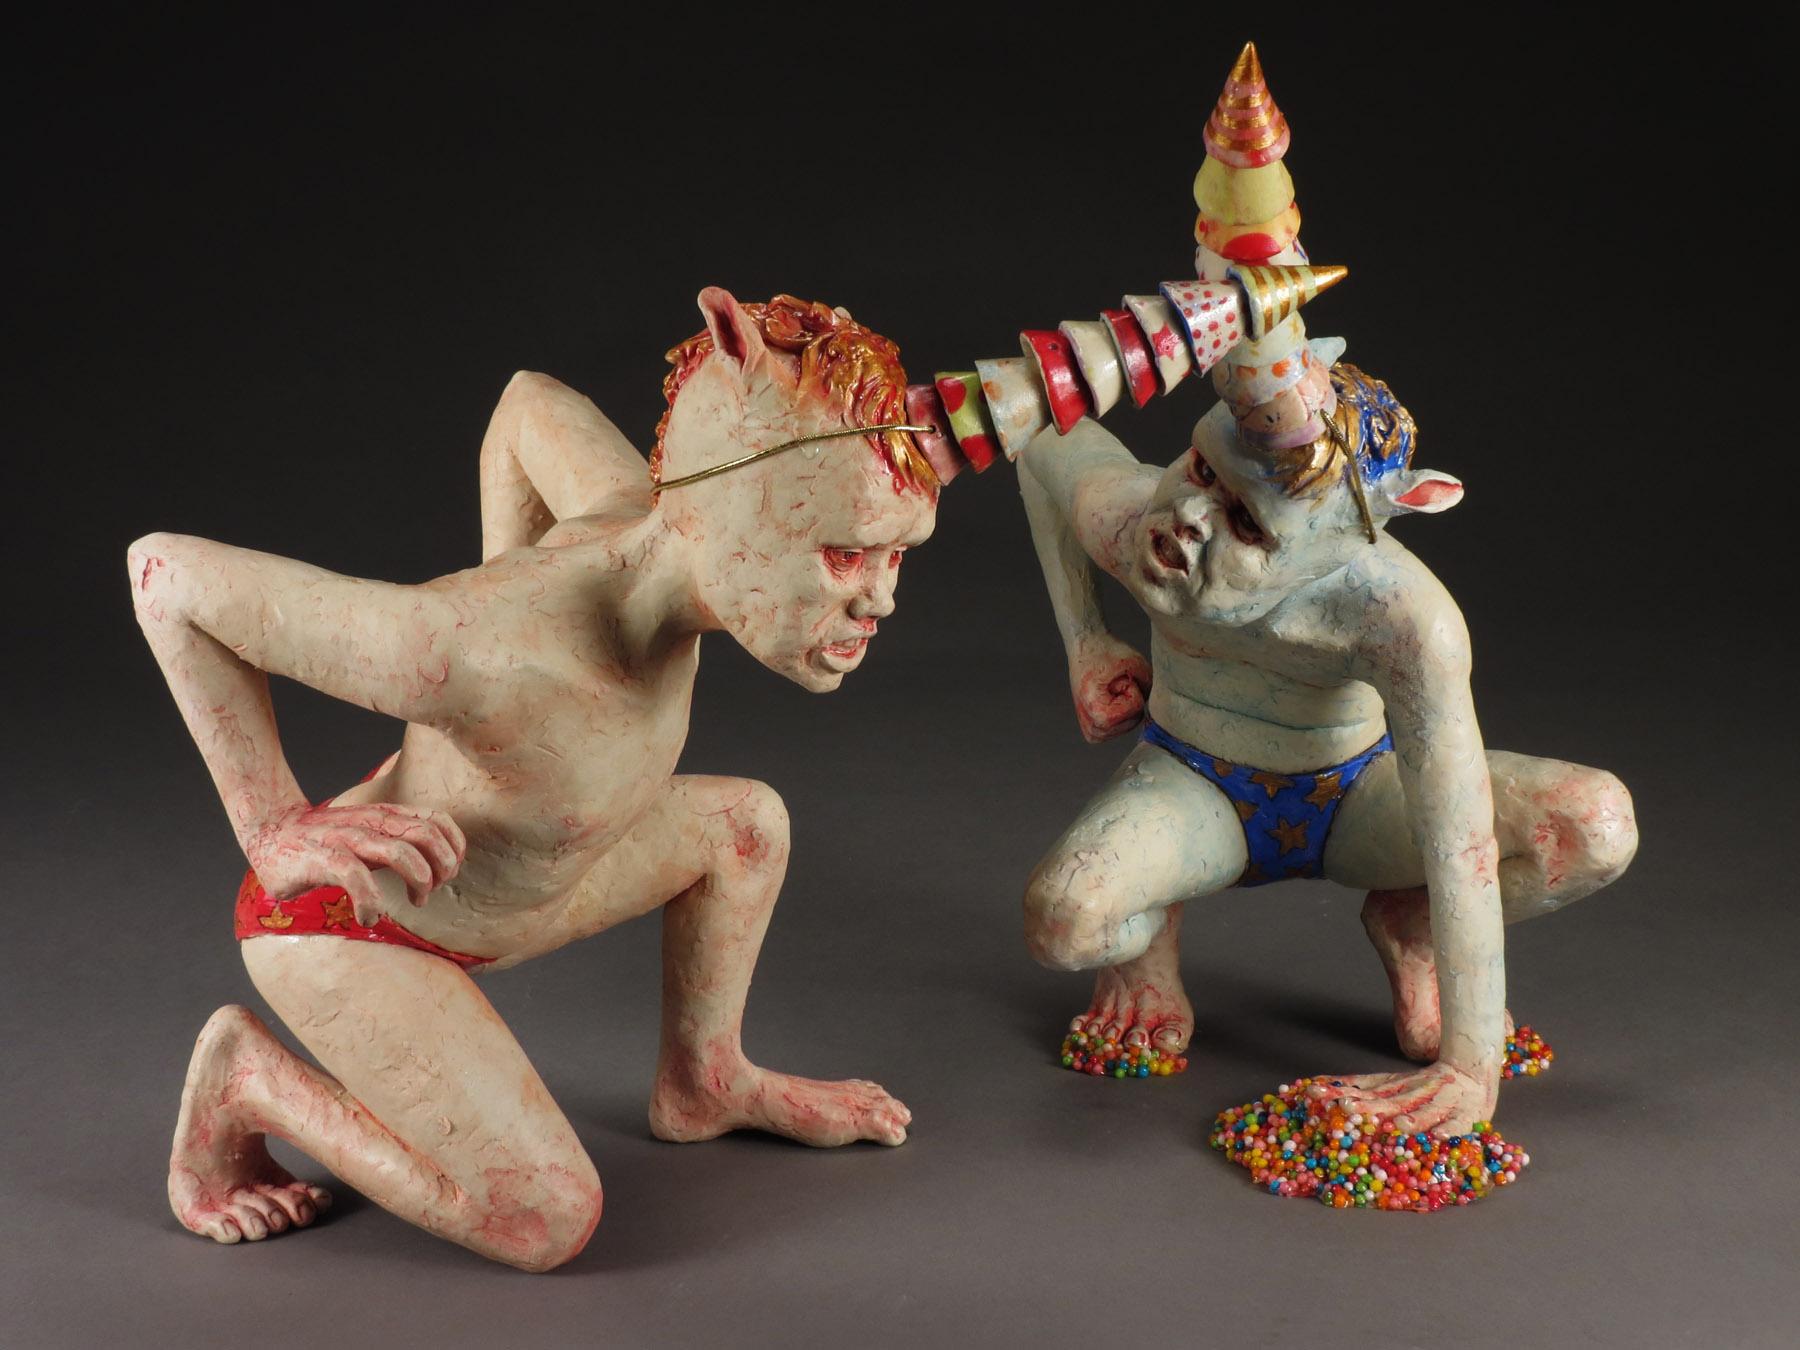 PARTY BOYS - surreal ceramic sculpture - monsters